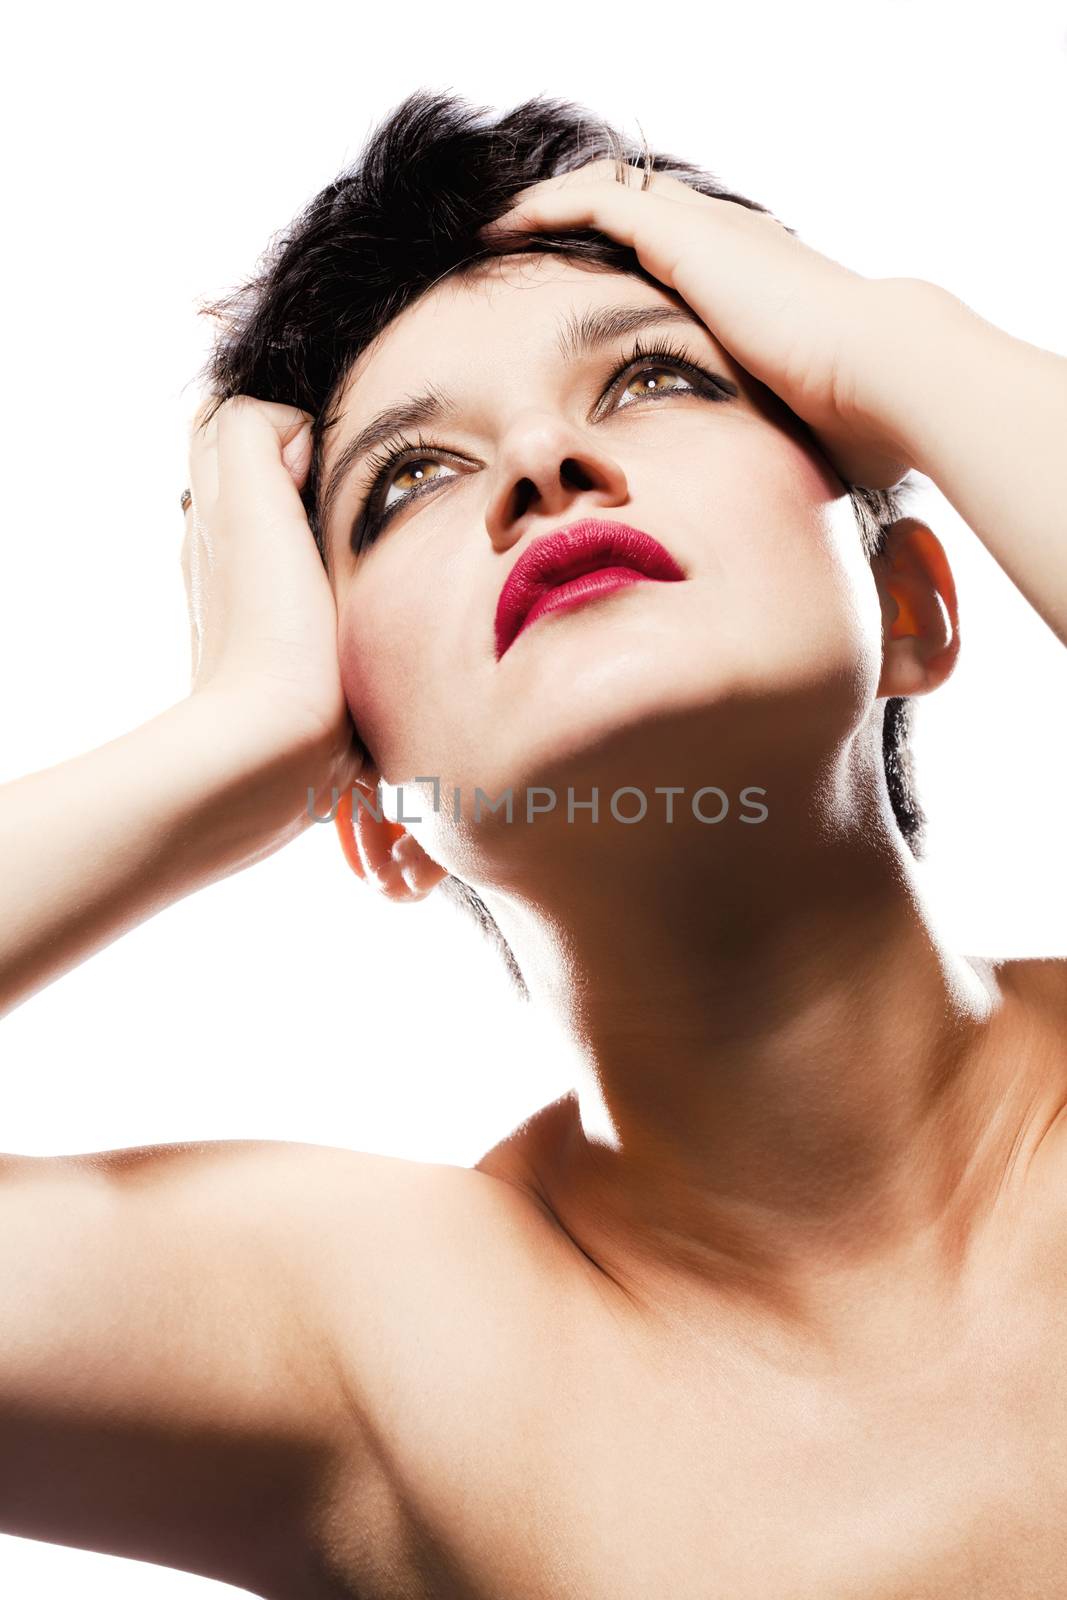 studio portrait of a girl with short hair, looking up